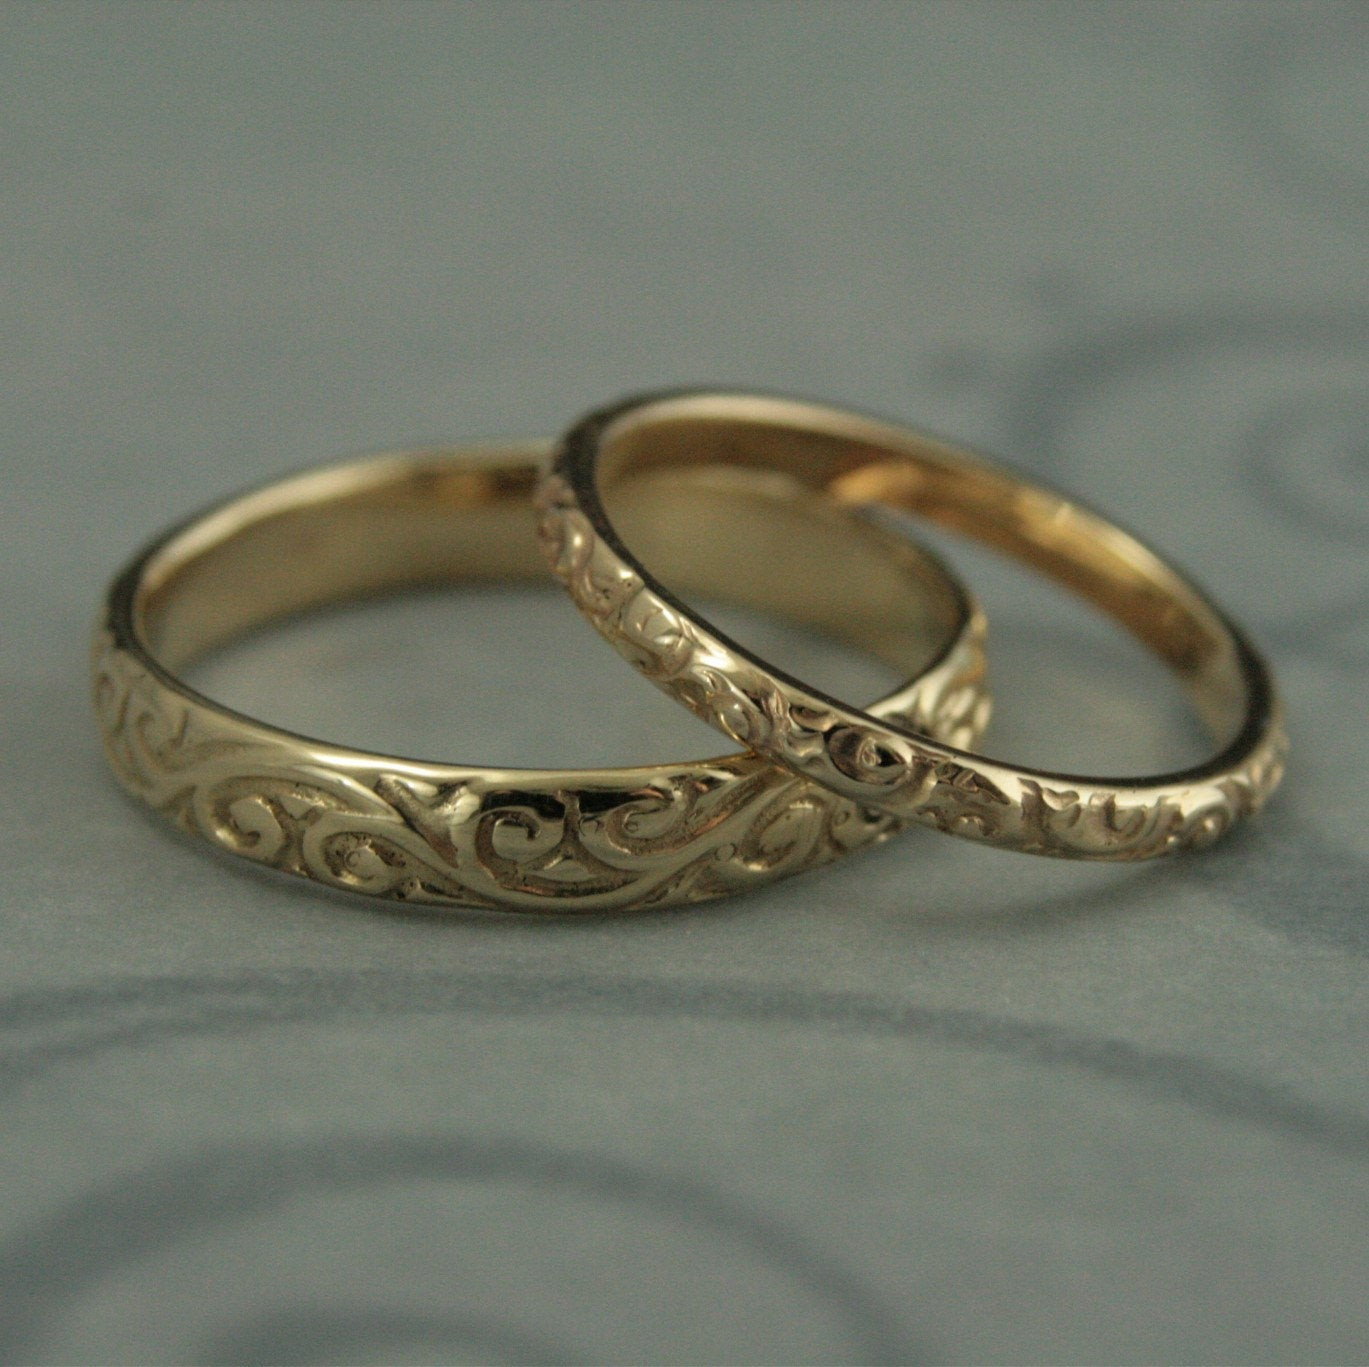 Vintage Wedding Bands
 Patterned Wedding Band Set Vintage Style Wedding Rings His and